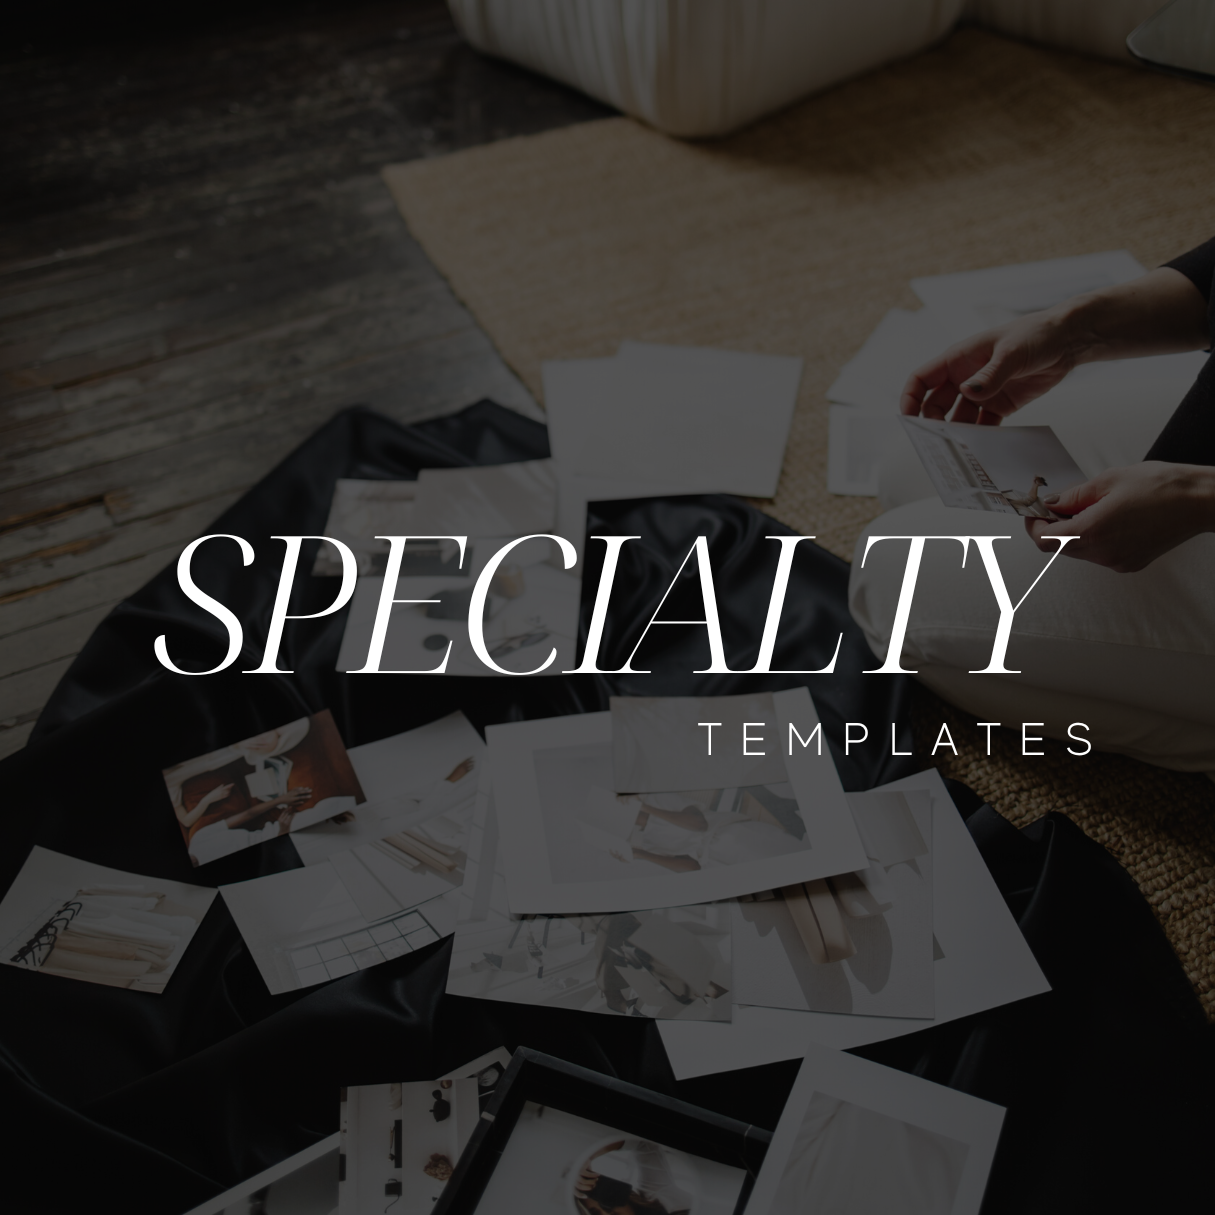 The Brand Strategy Specialty Templates